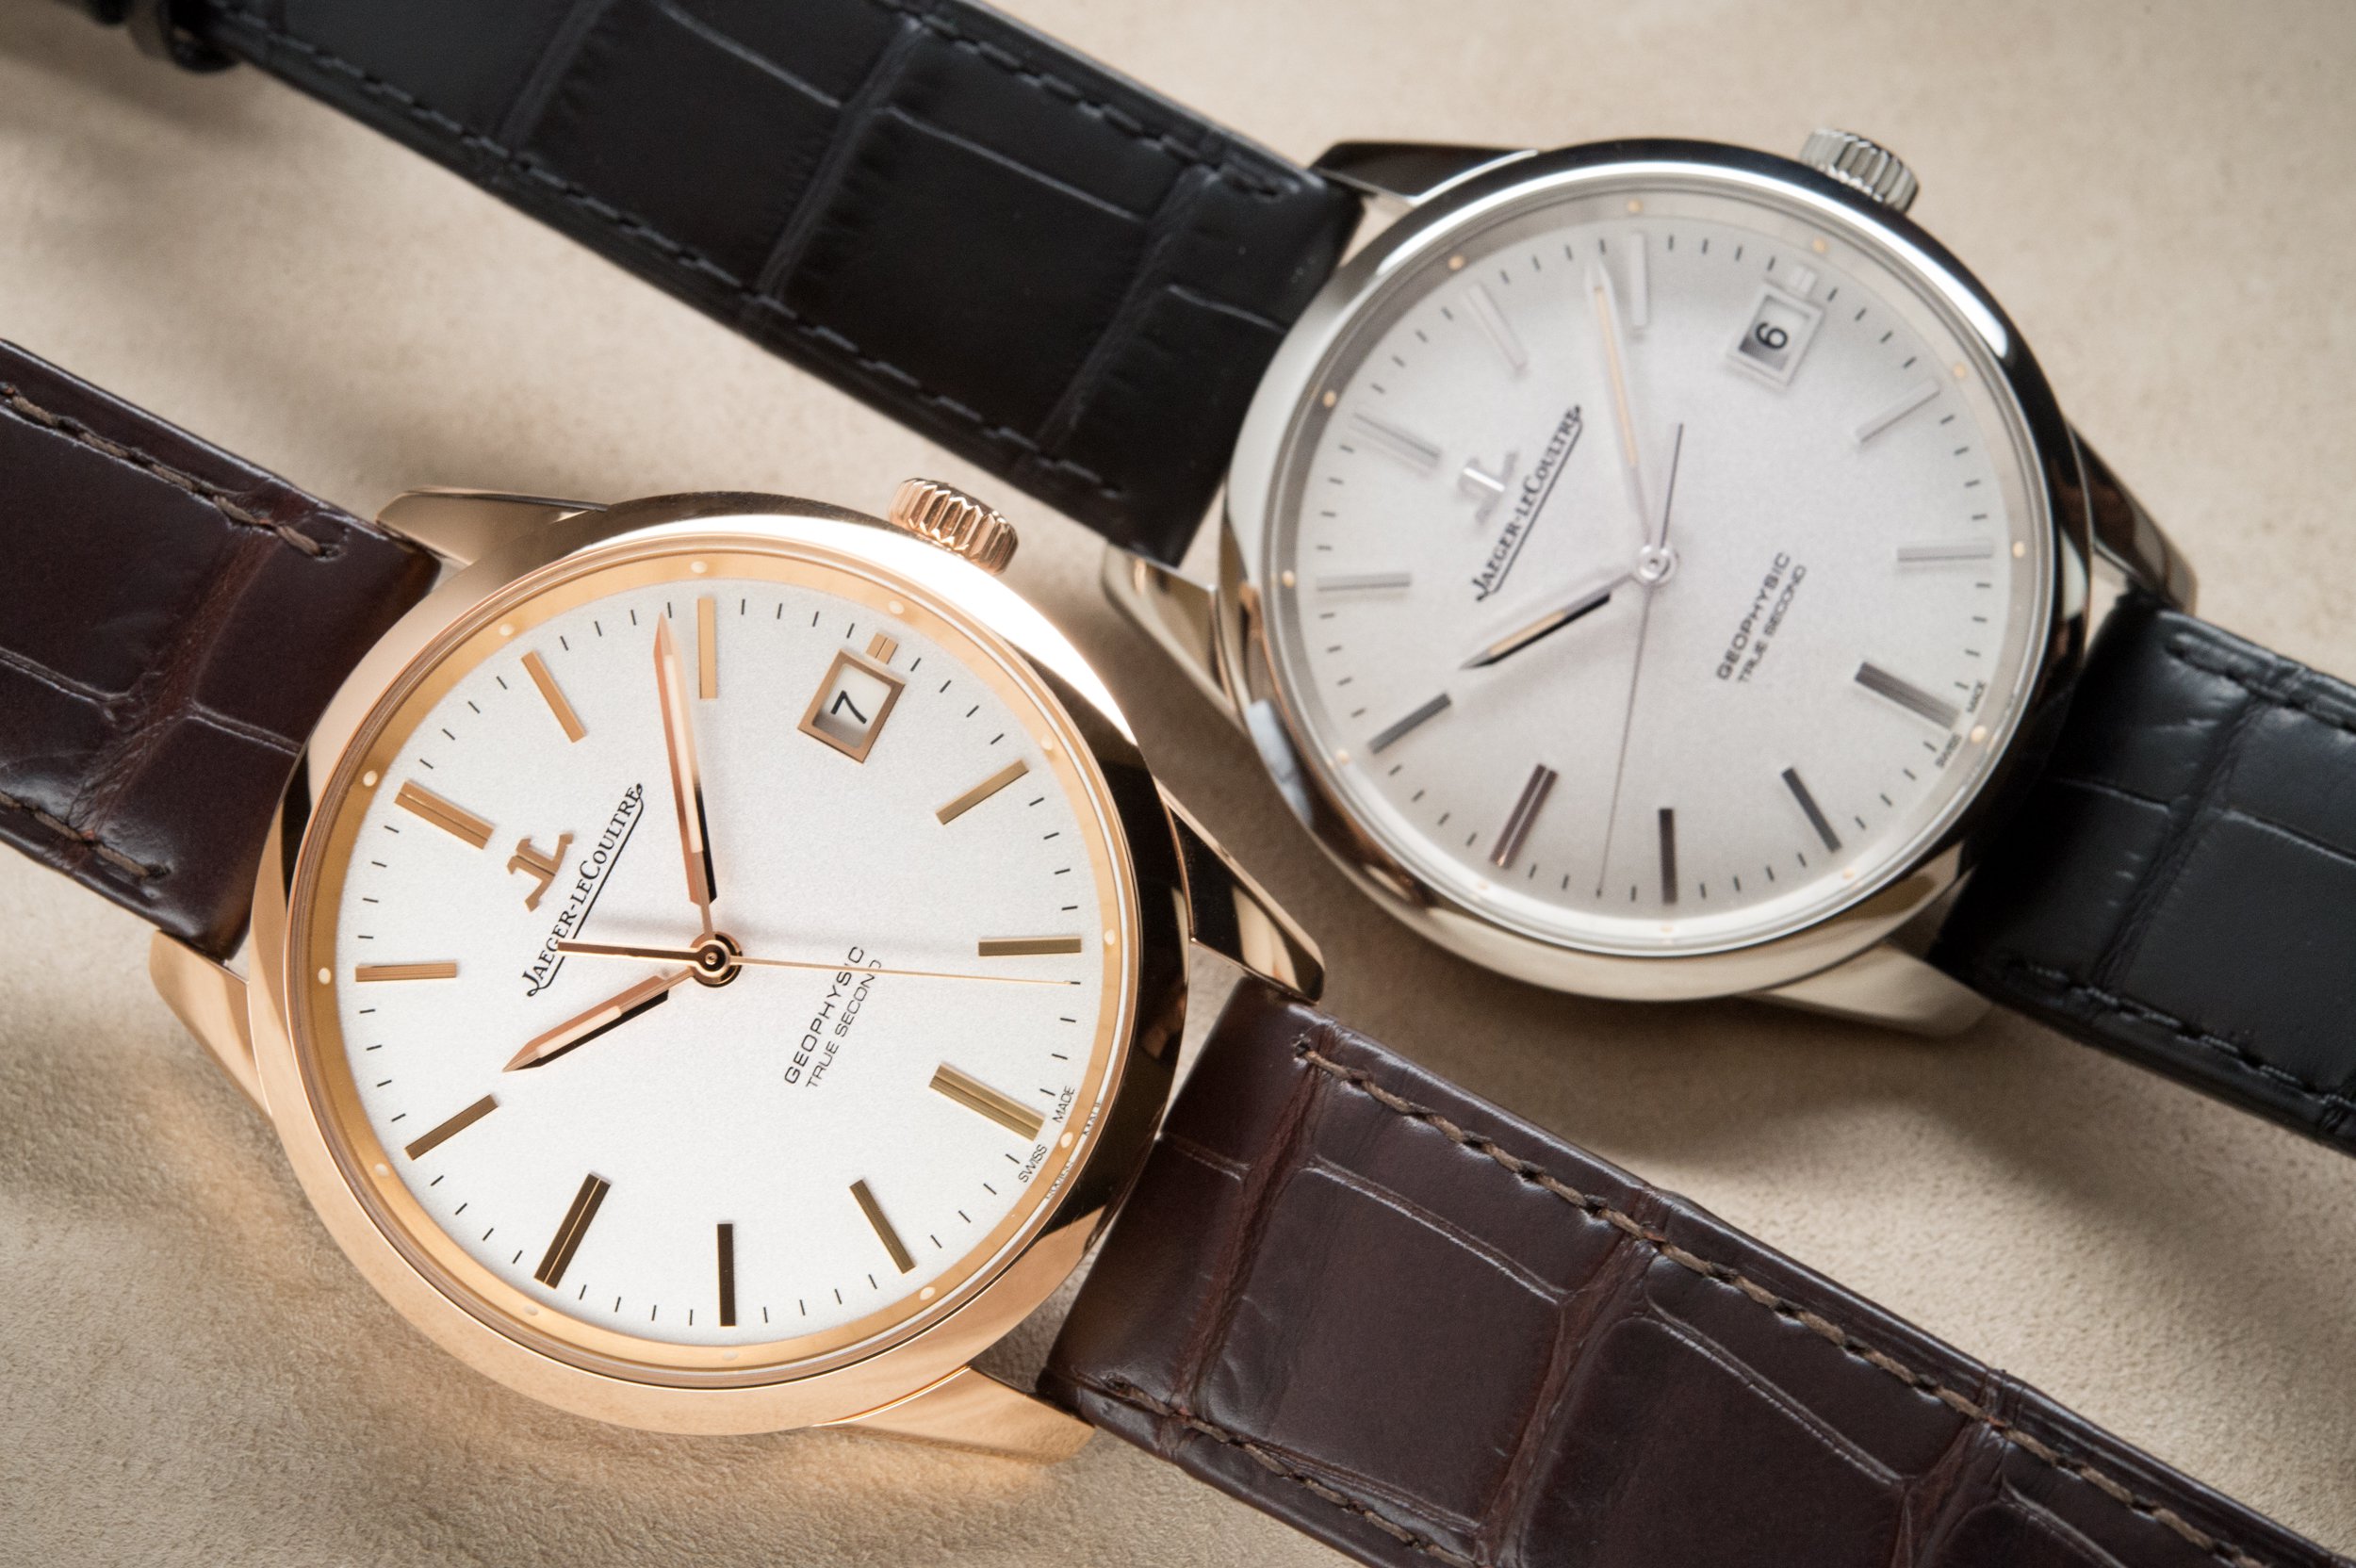 Jaeger-LeCoultre Geophysic True Second Watch Collection